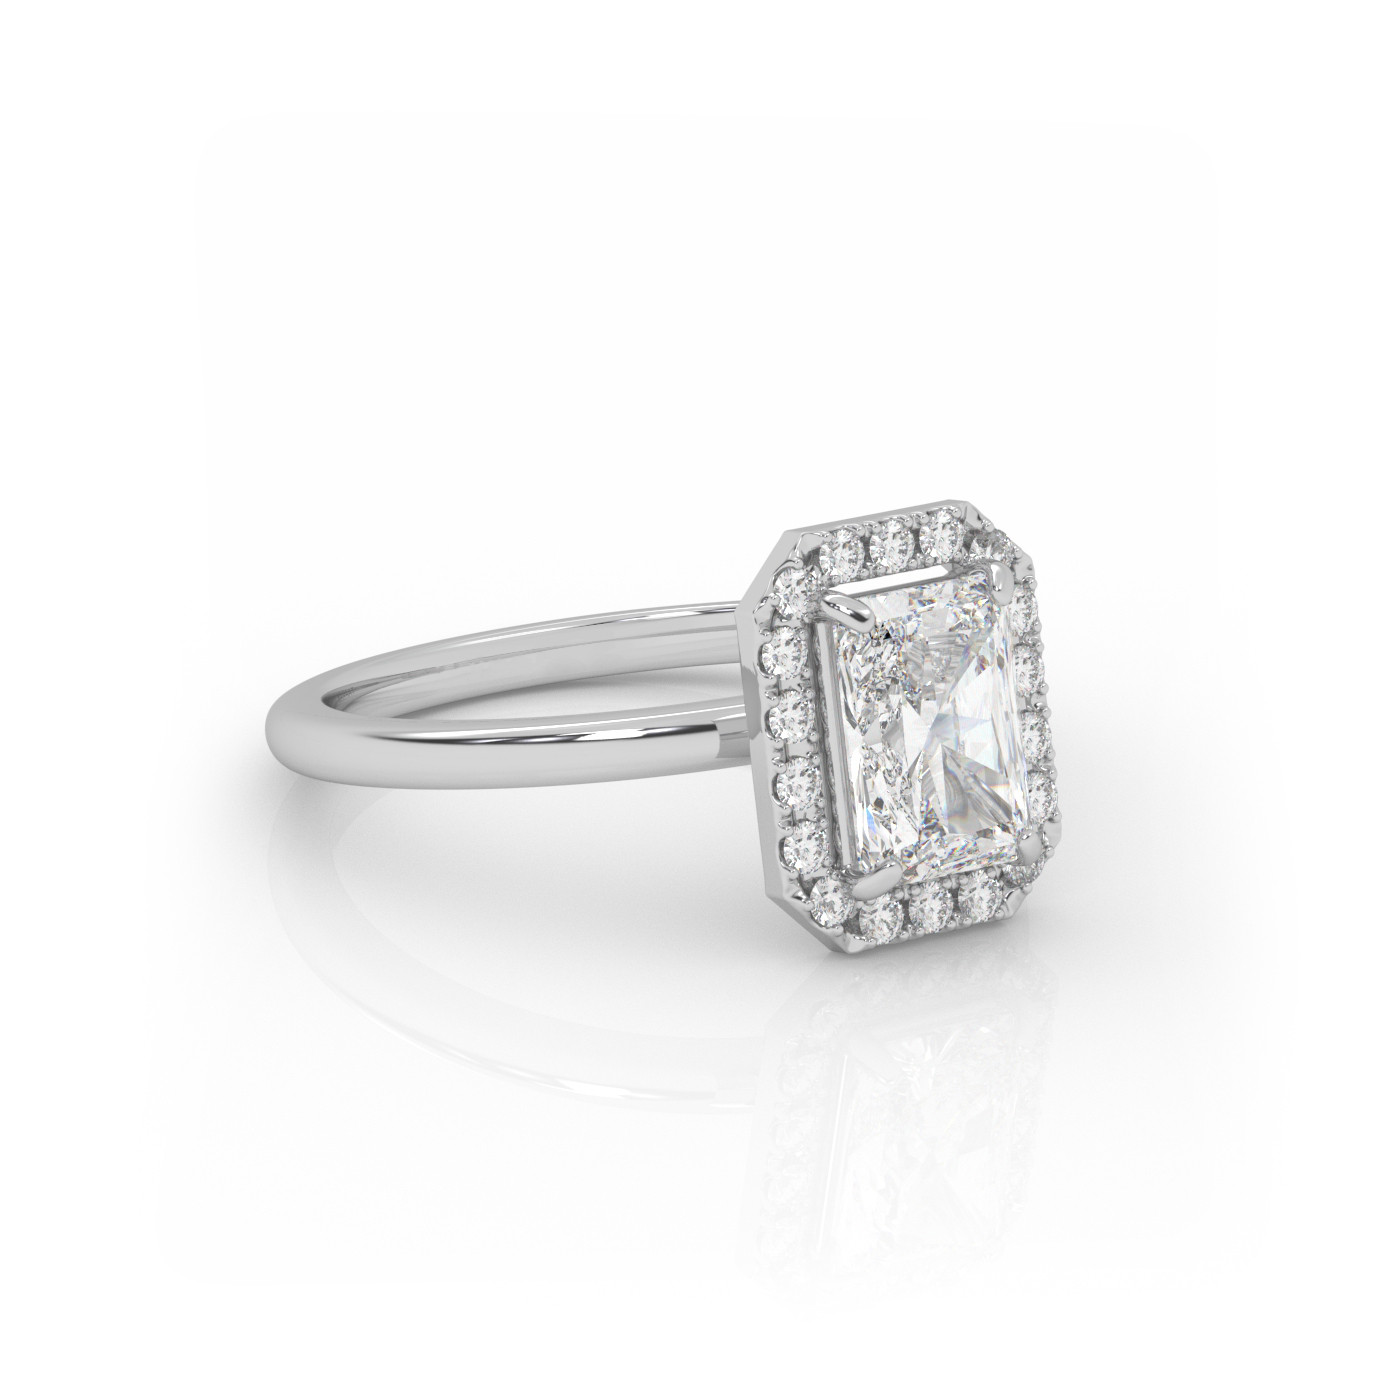 18K WHITE GOLD Radiant Diamond Cut Engagement Ring with Halo Style